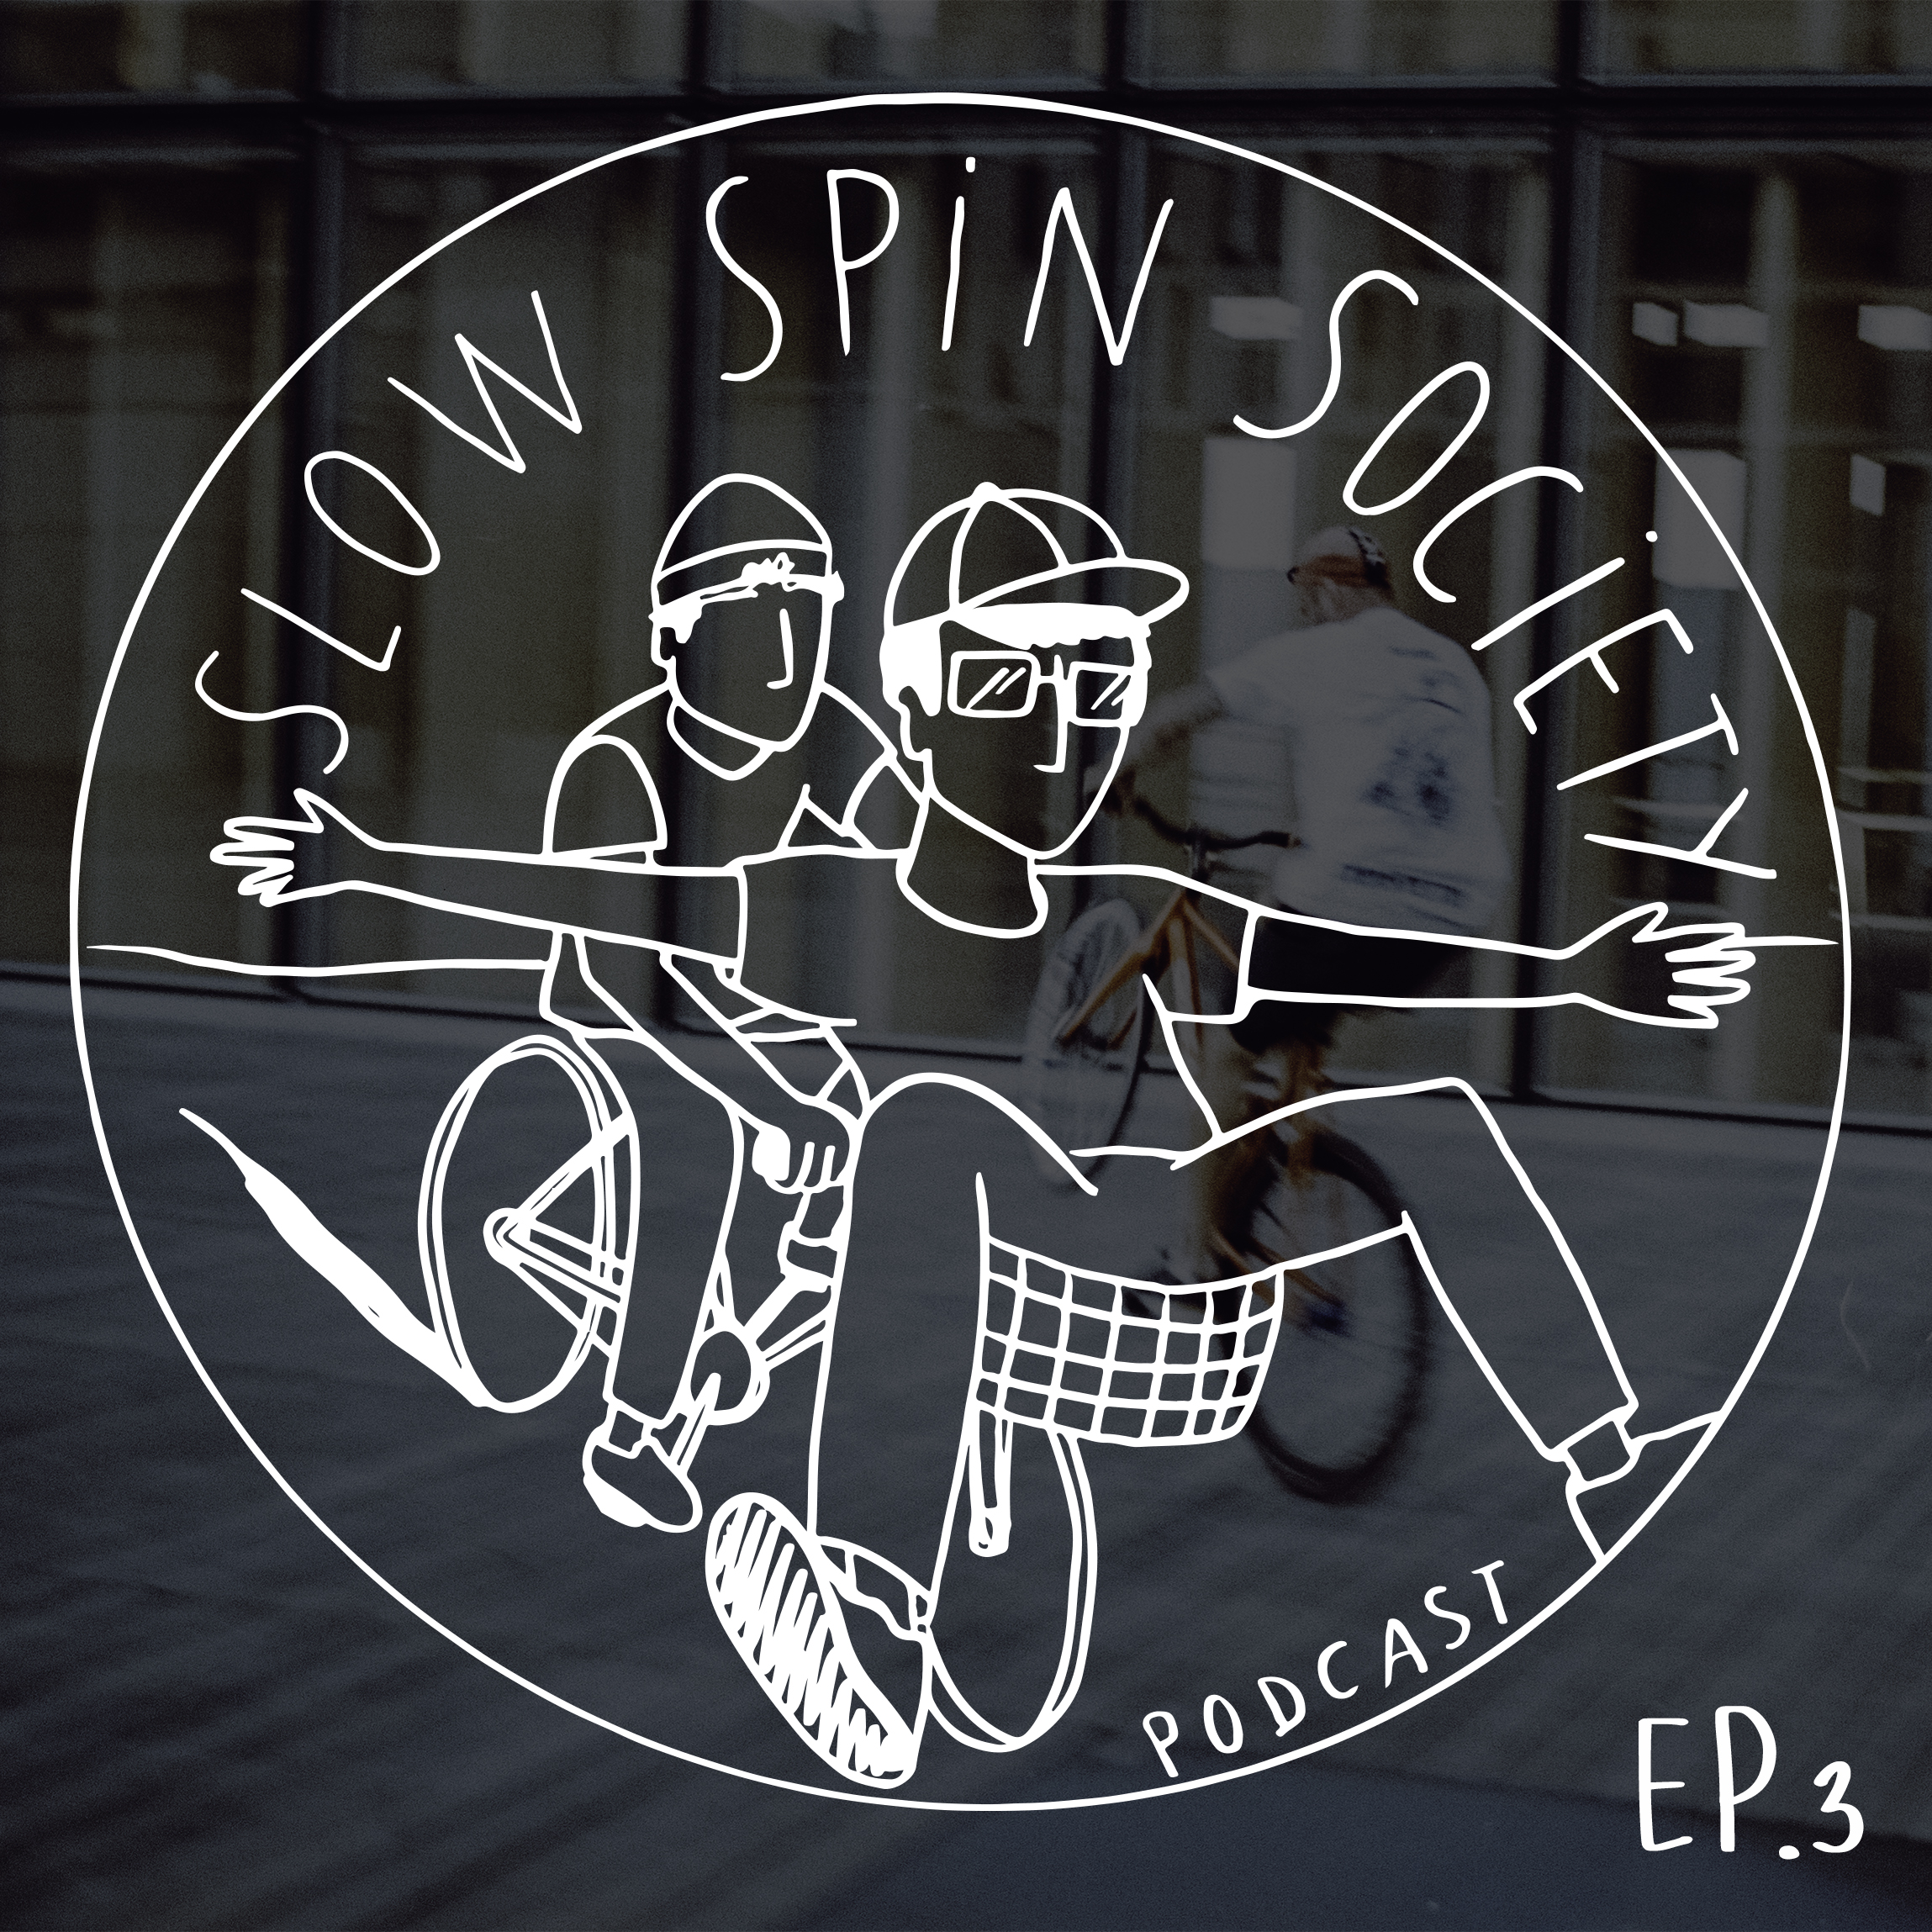 The Slow Spin Society Podcast Ep.3 : Rob (fxd.bln) on Berlin's Fixed Gear Culture